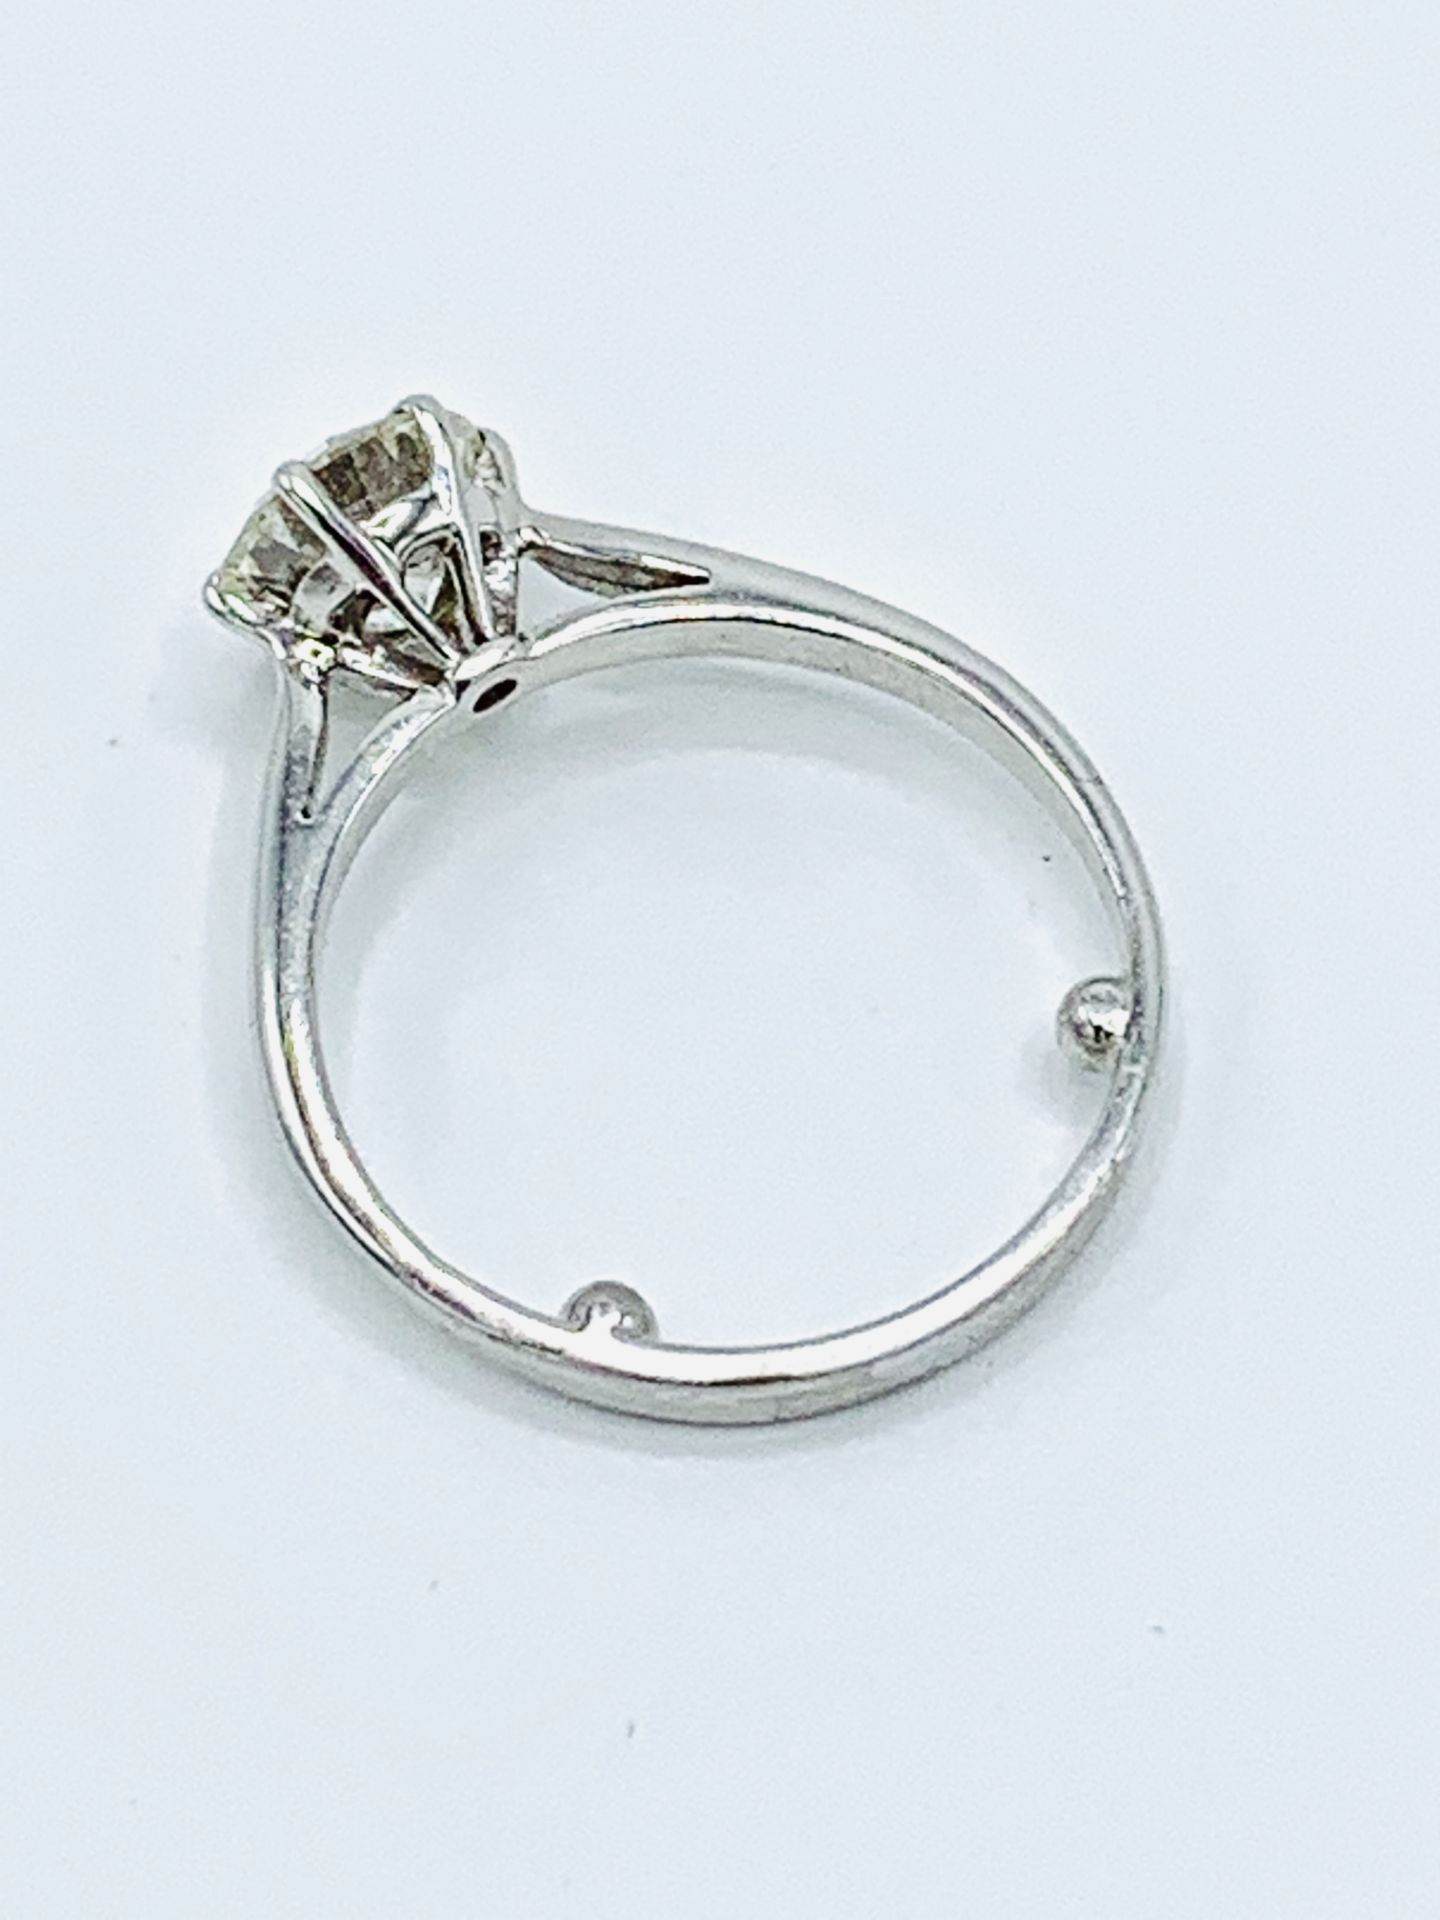 White gold diamond solitaire ring. - Image 7 of 9